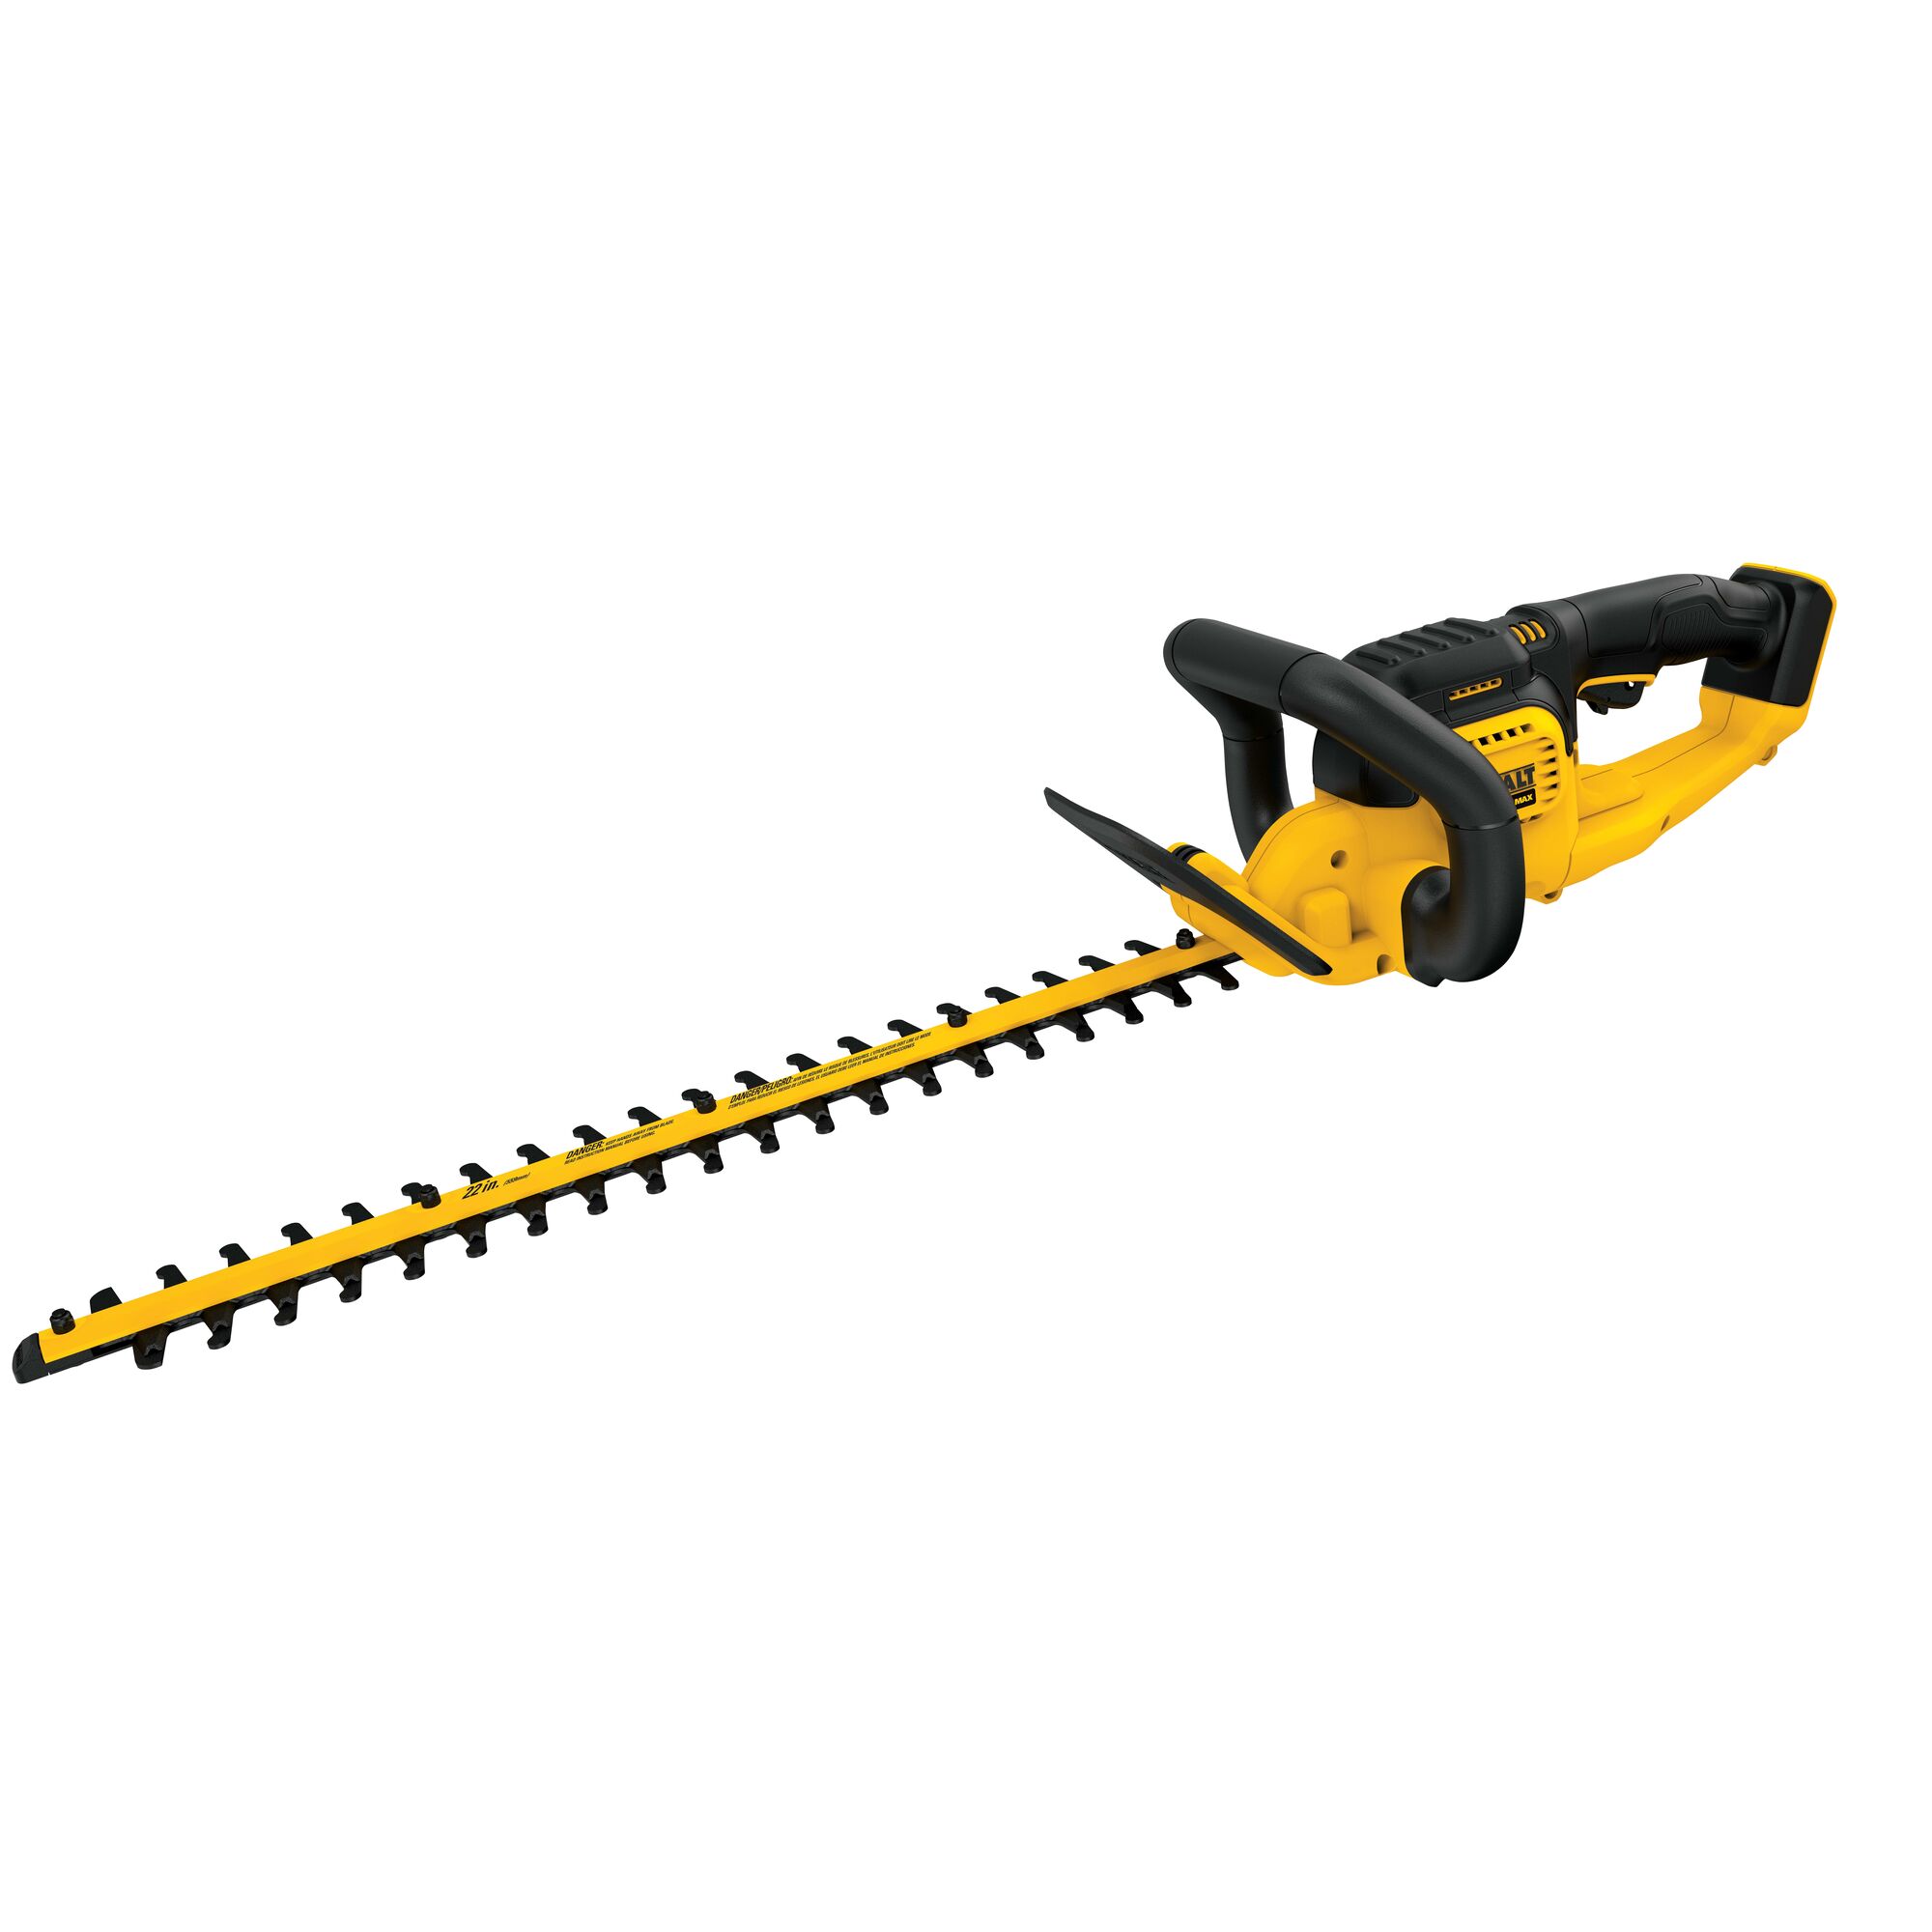 Electric Hedge Trimmer, 22-Inch